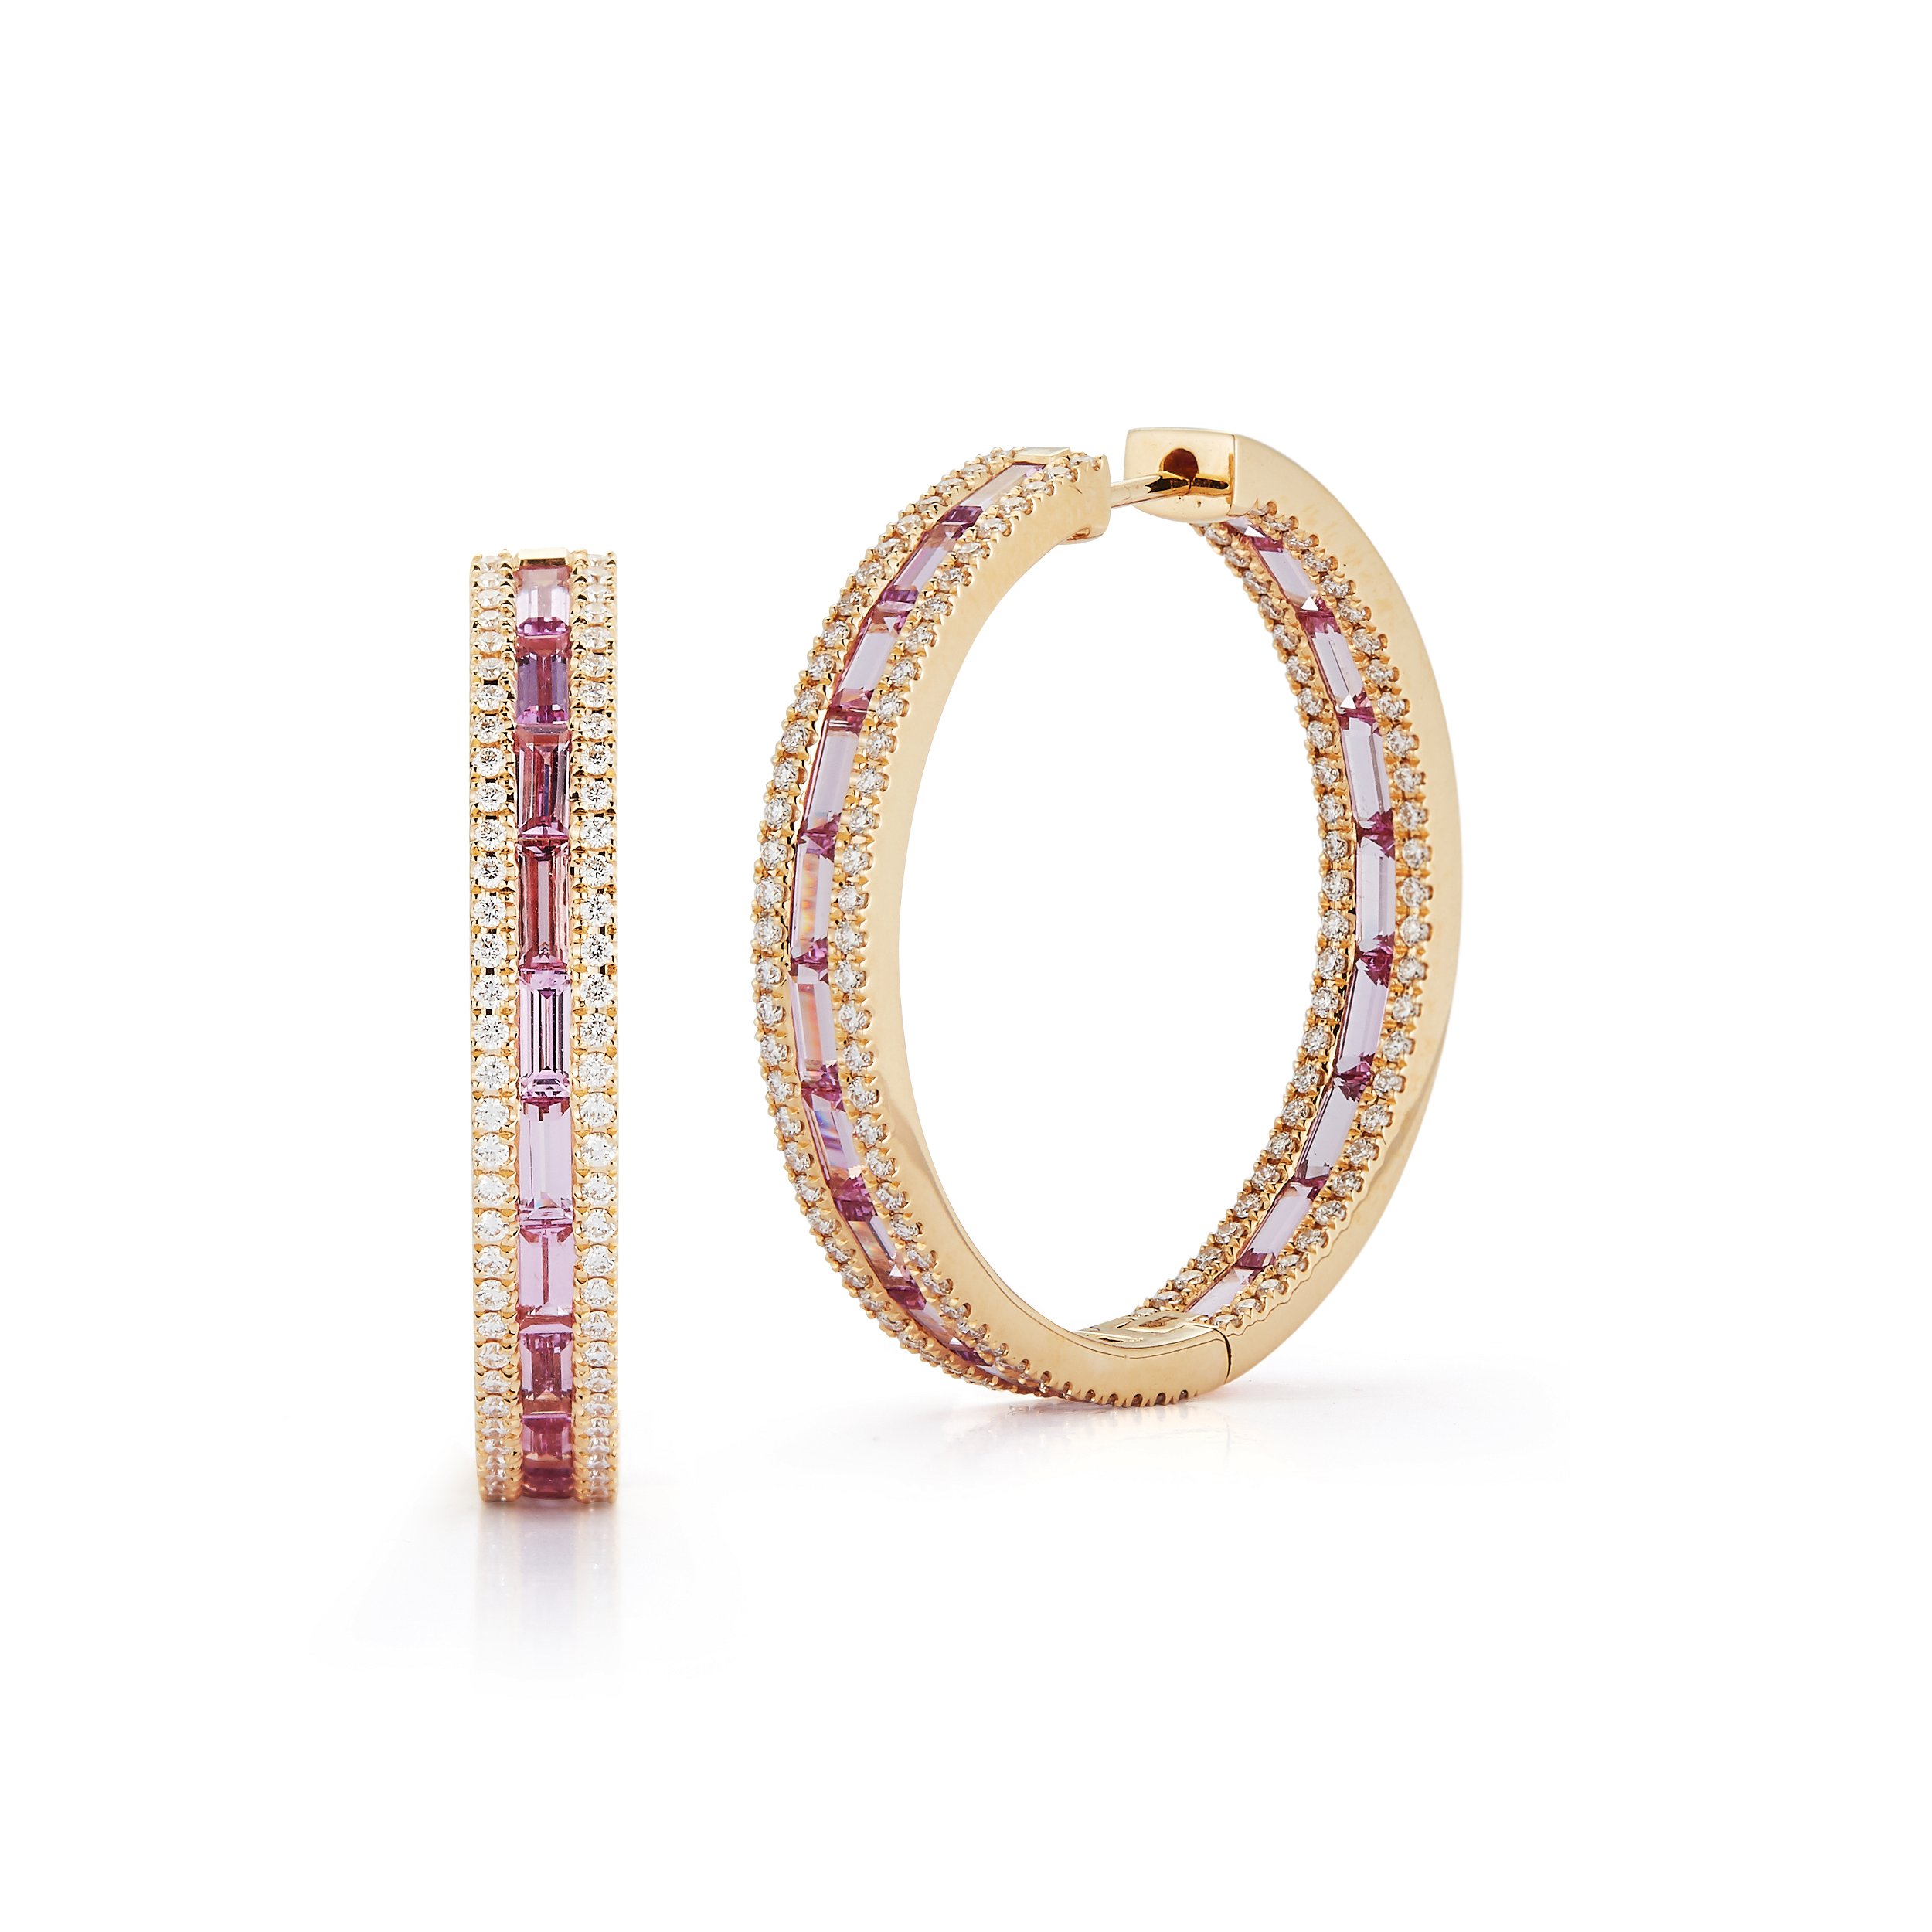 Origami Hoop Earrings with Light Pink Sapphire and White Diamonds in 18kt Yellow Gold